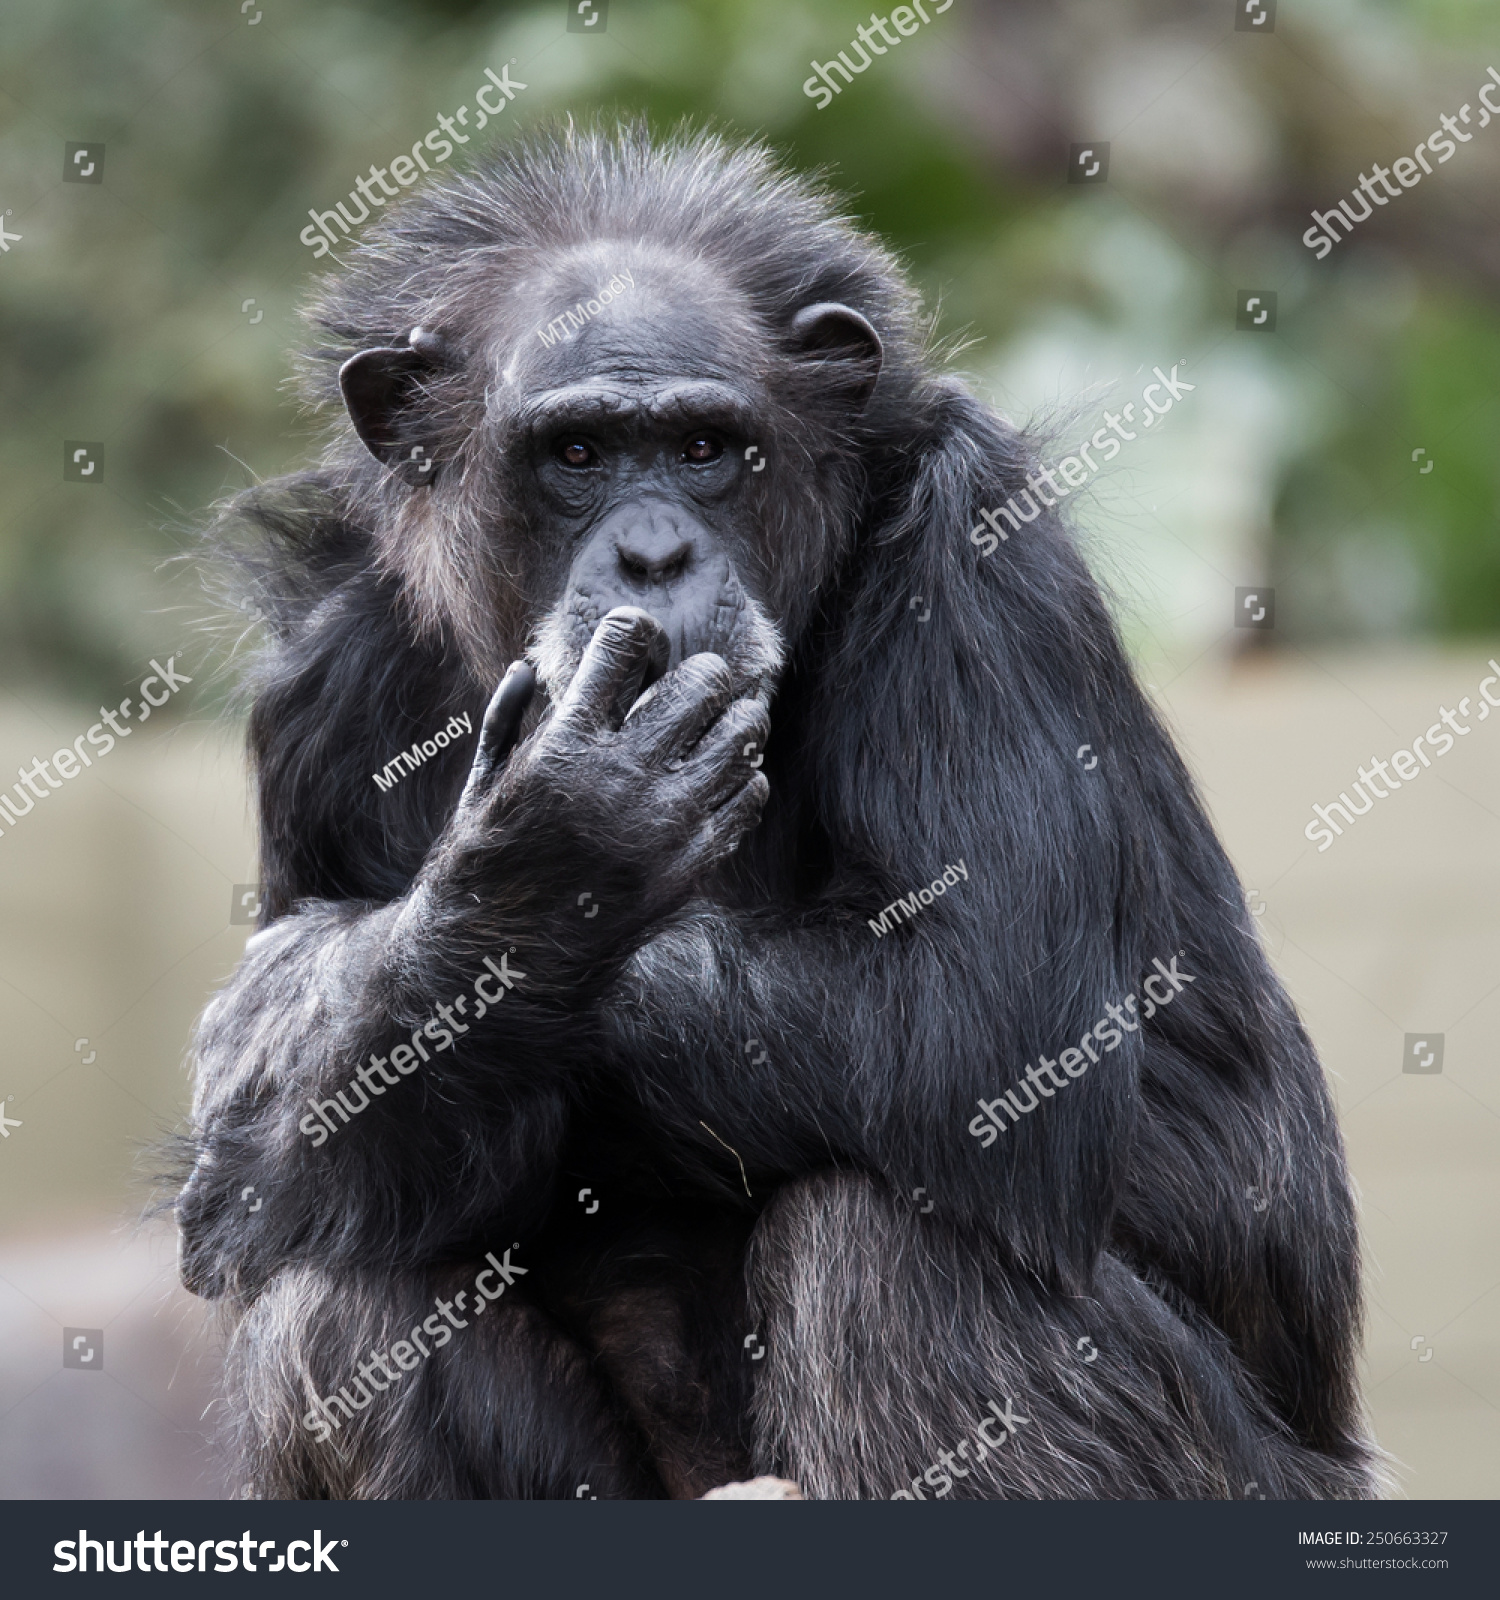 Ape Deep Thought Stock Photo (Royalty Free) 250663327 - Shutterstock